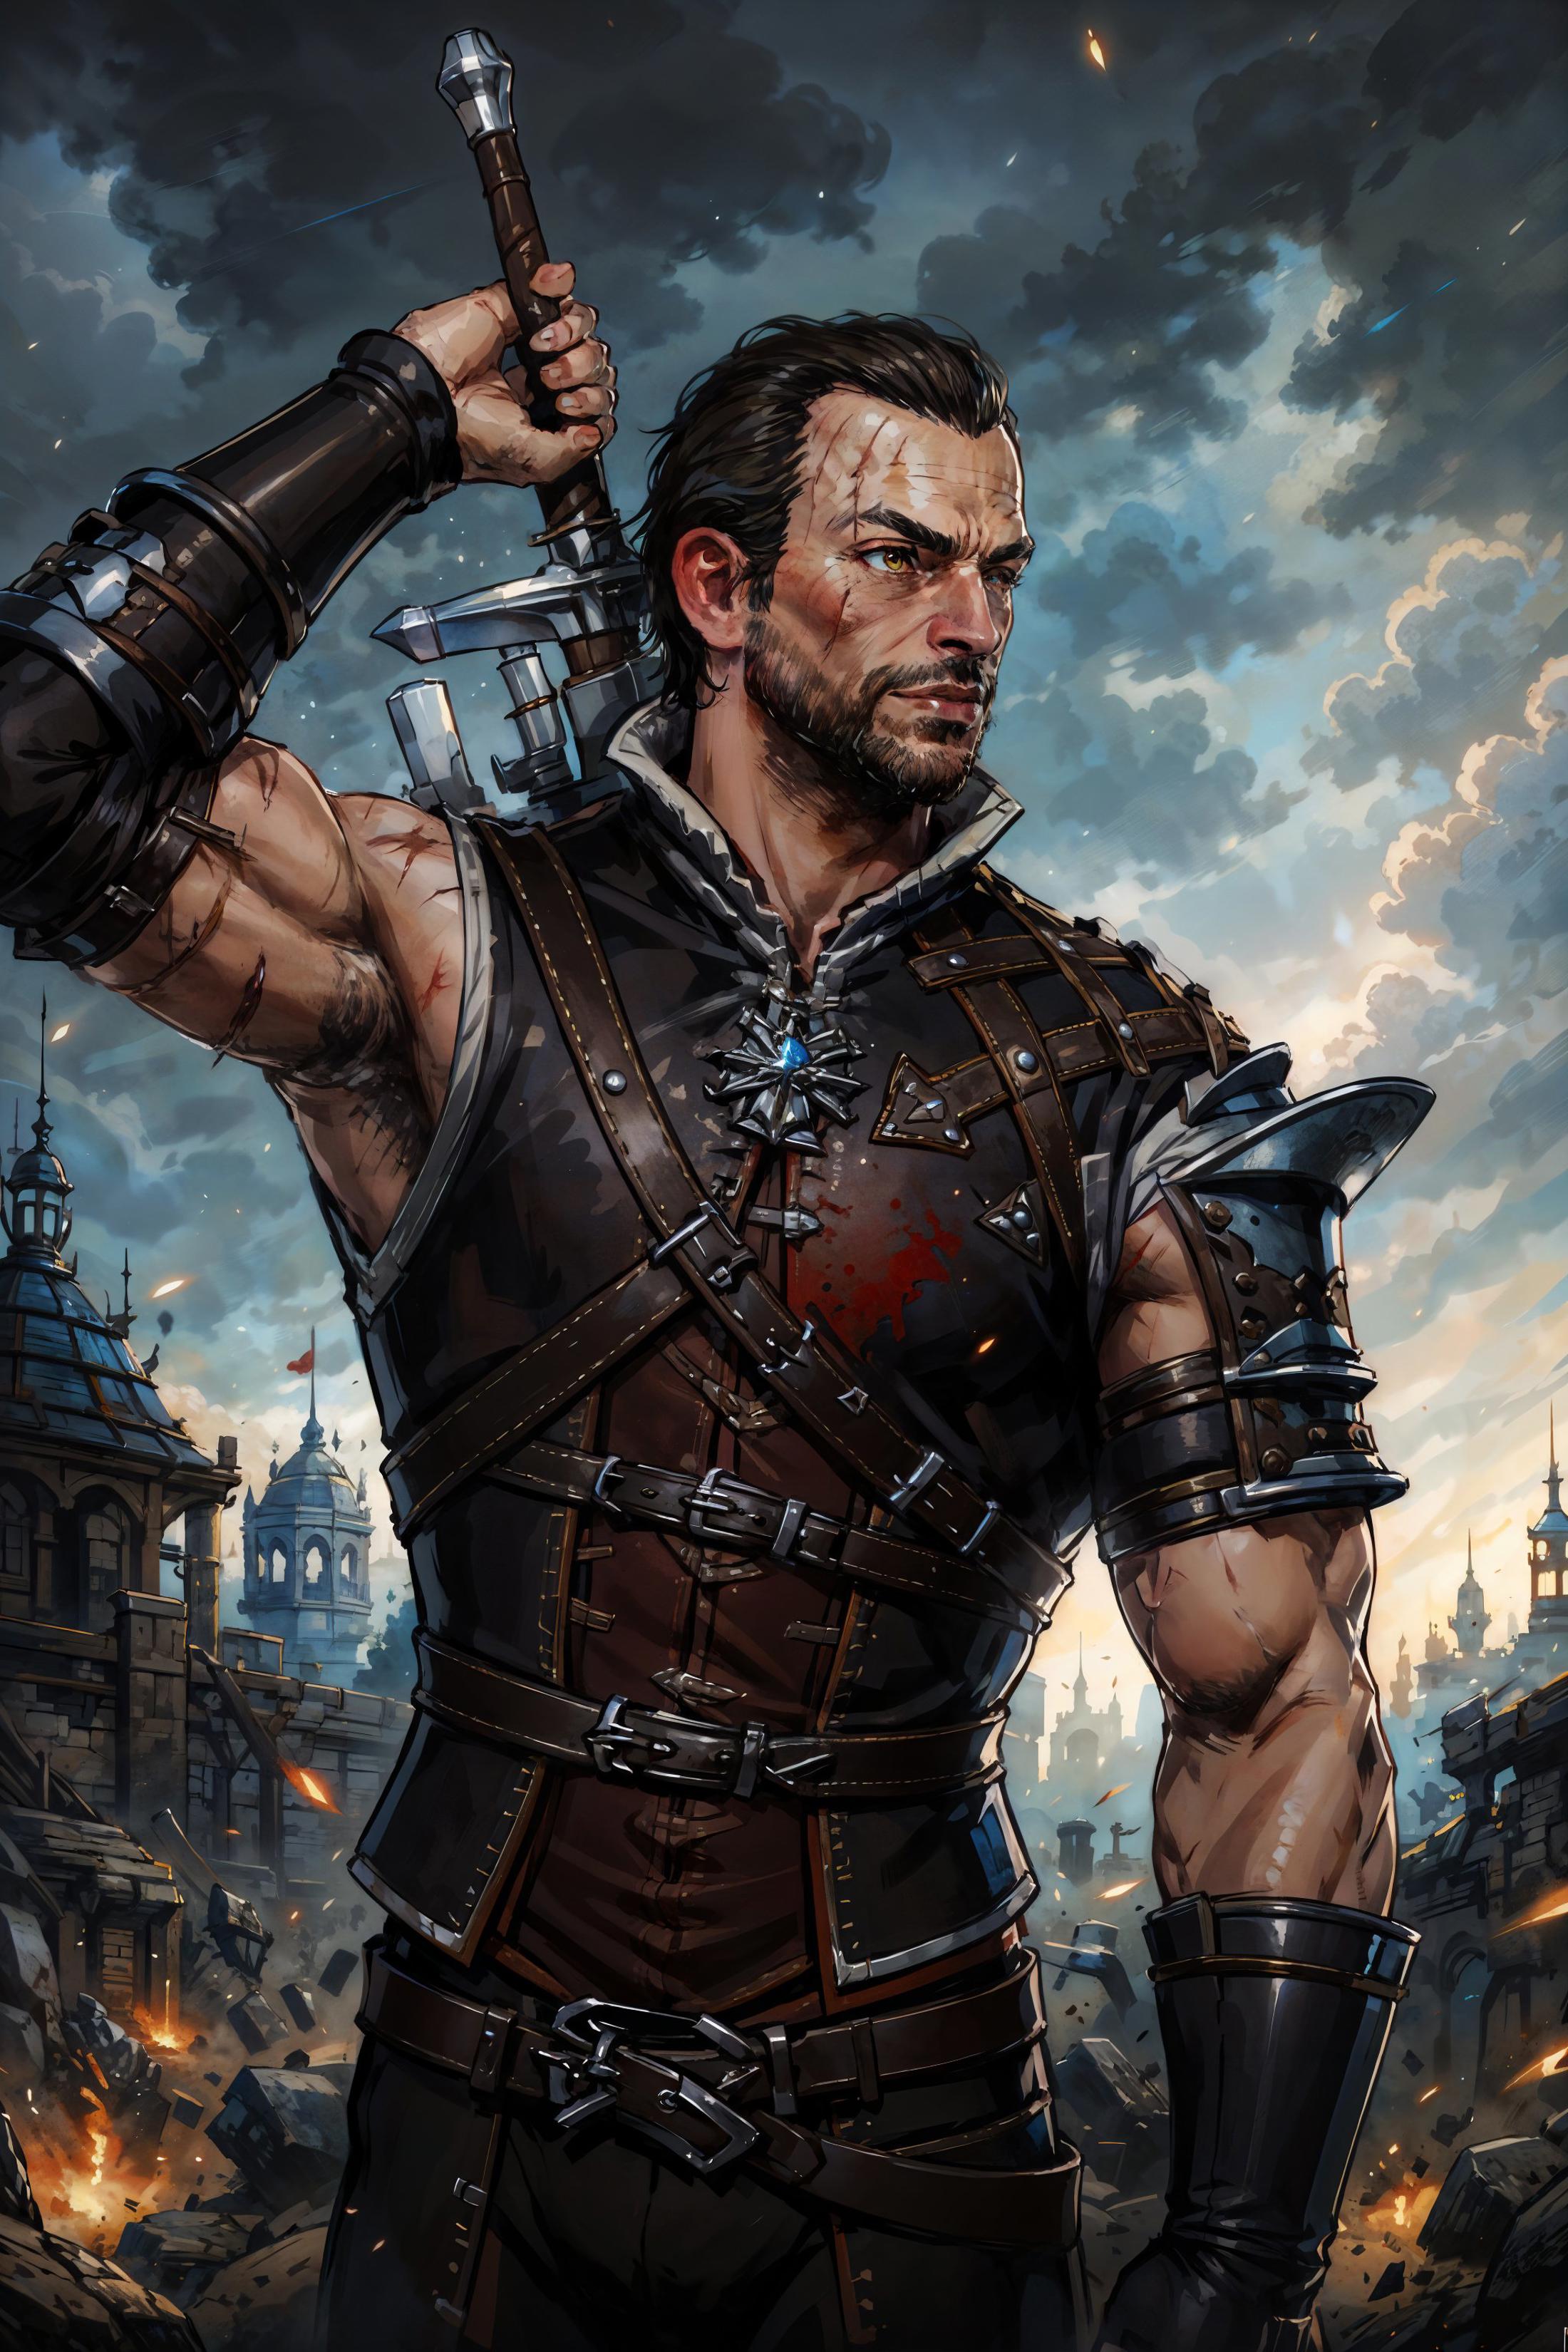 Lambert | The Witcher 3 : Wild Hunt image by soul3142